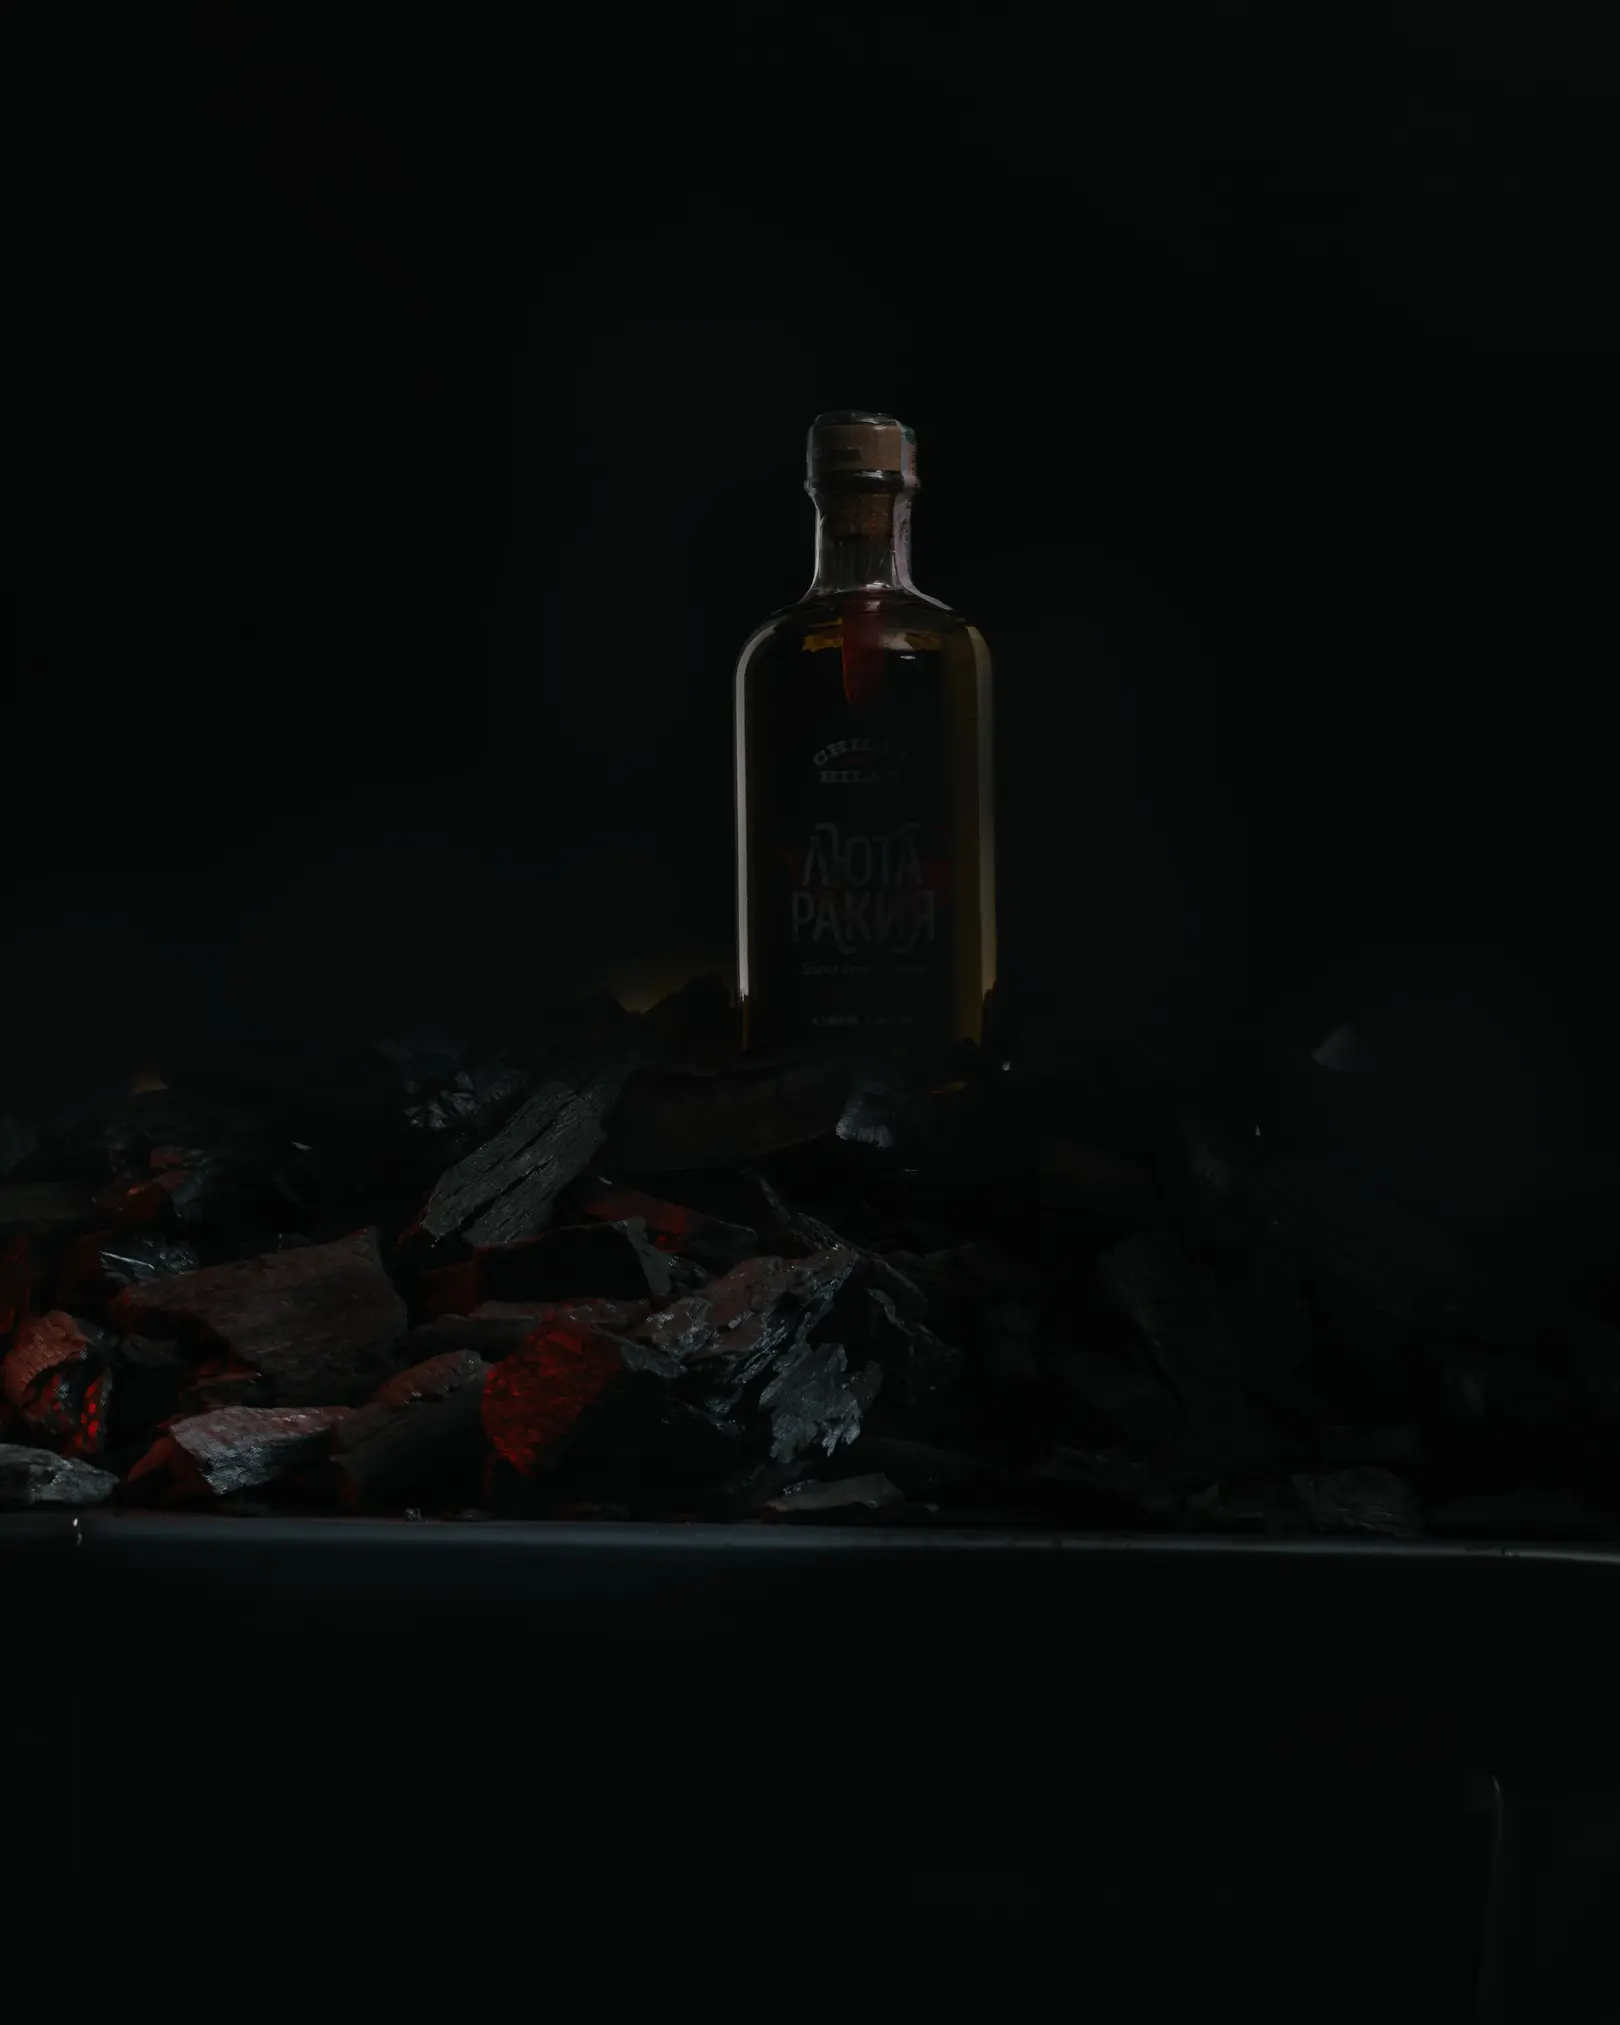 Result 3. The photo shows the result of shooting a bottle according to the light scheme shown in the second schema. The viewer sees red coals.